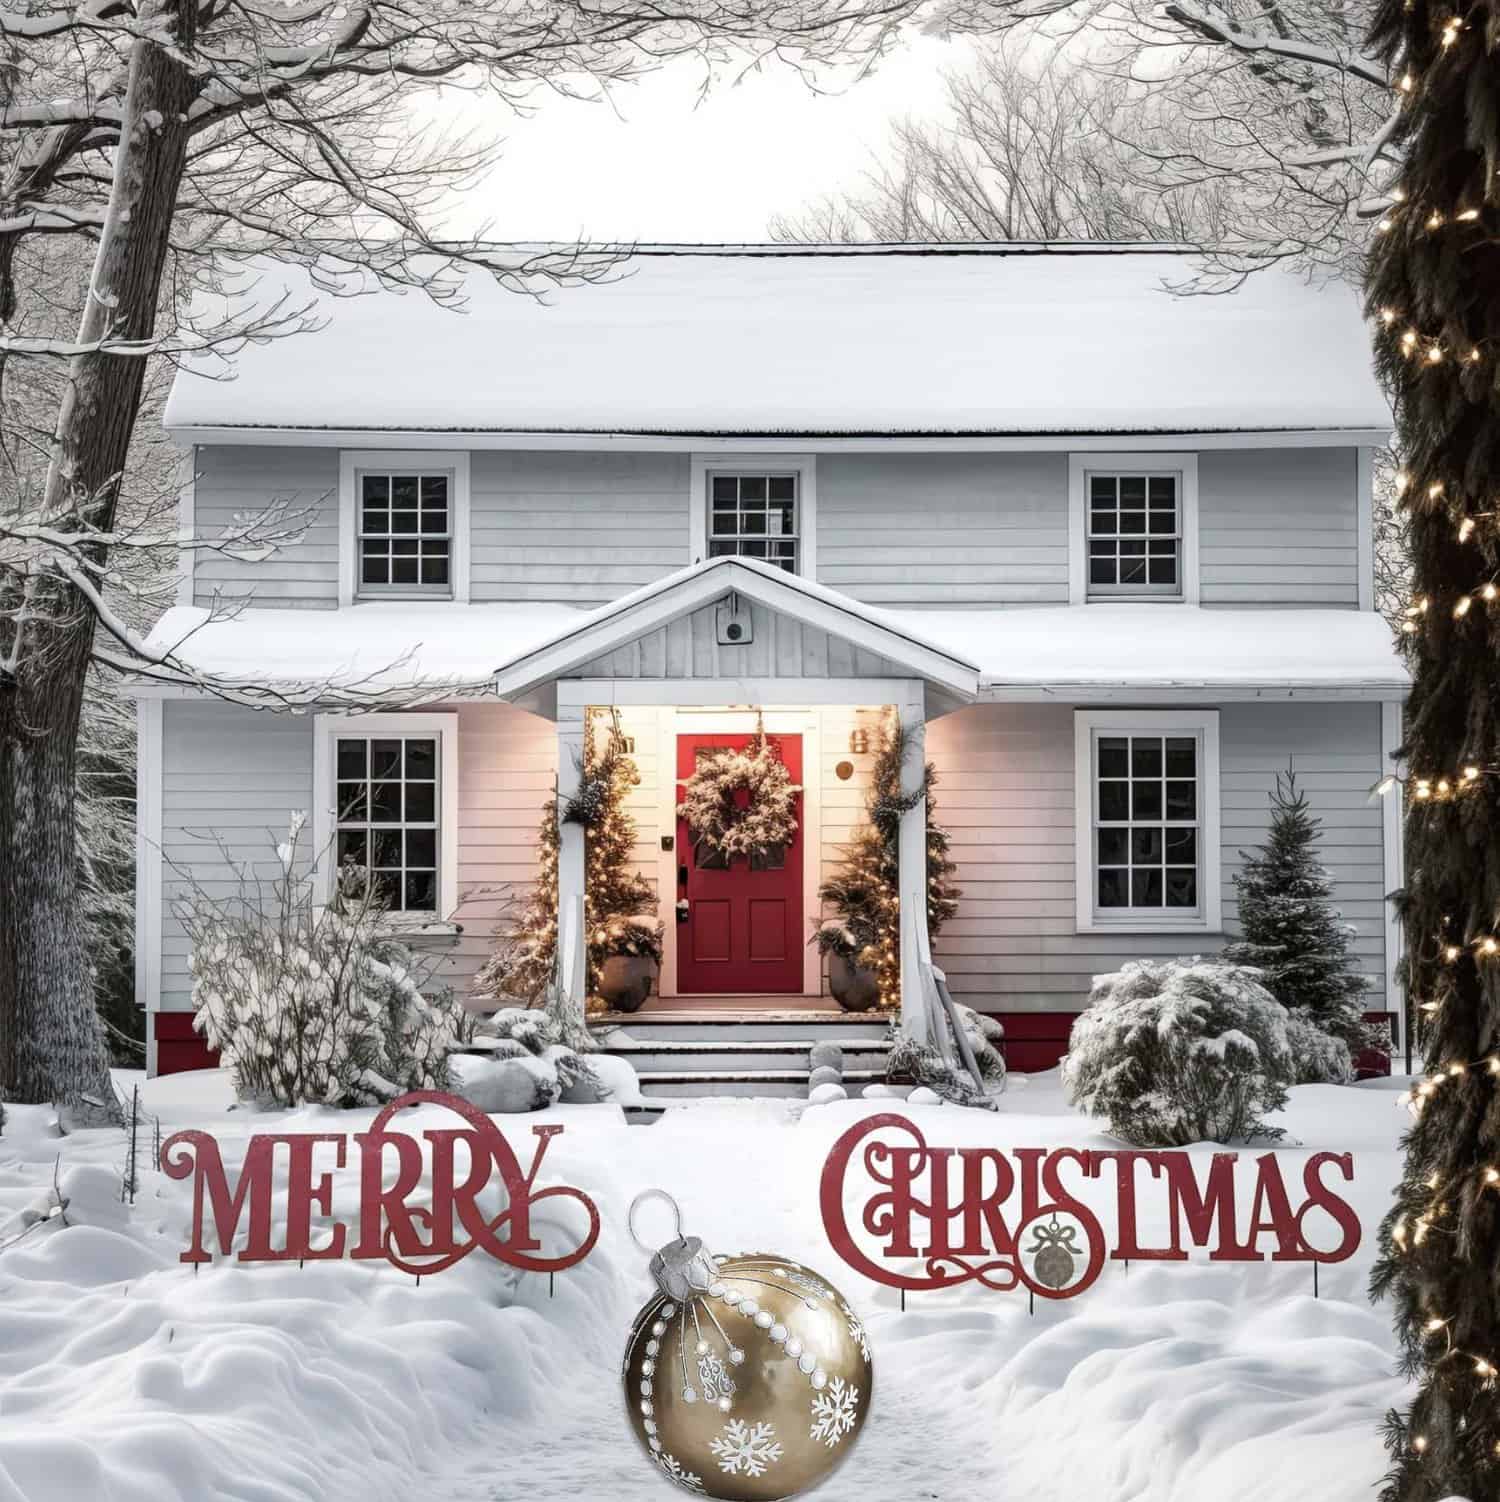 merry christmas holiday decorated home exterior view with snow